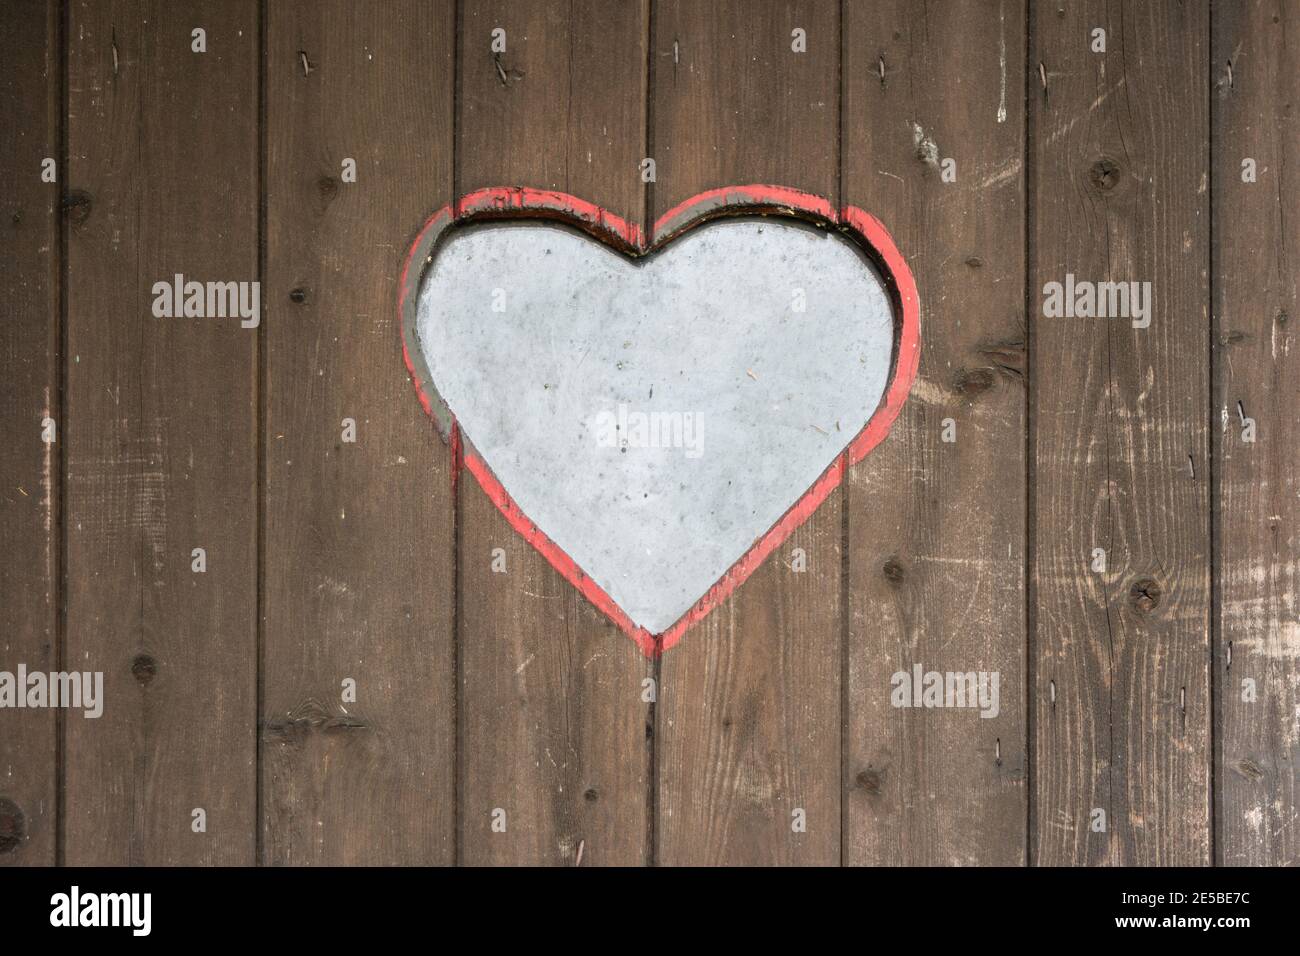 Germany 'Valentinstag' Wooden Heart Template Stock Photo